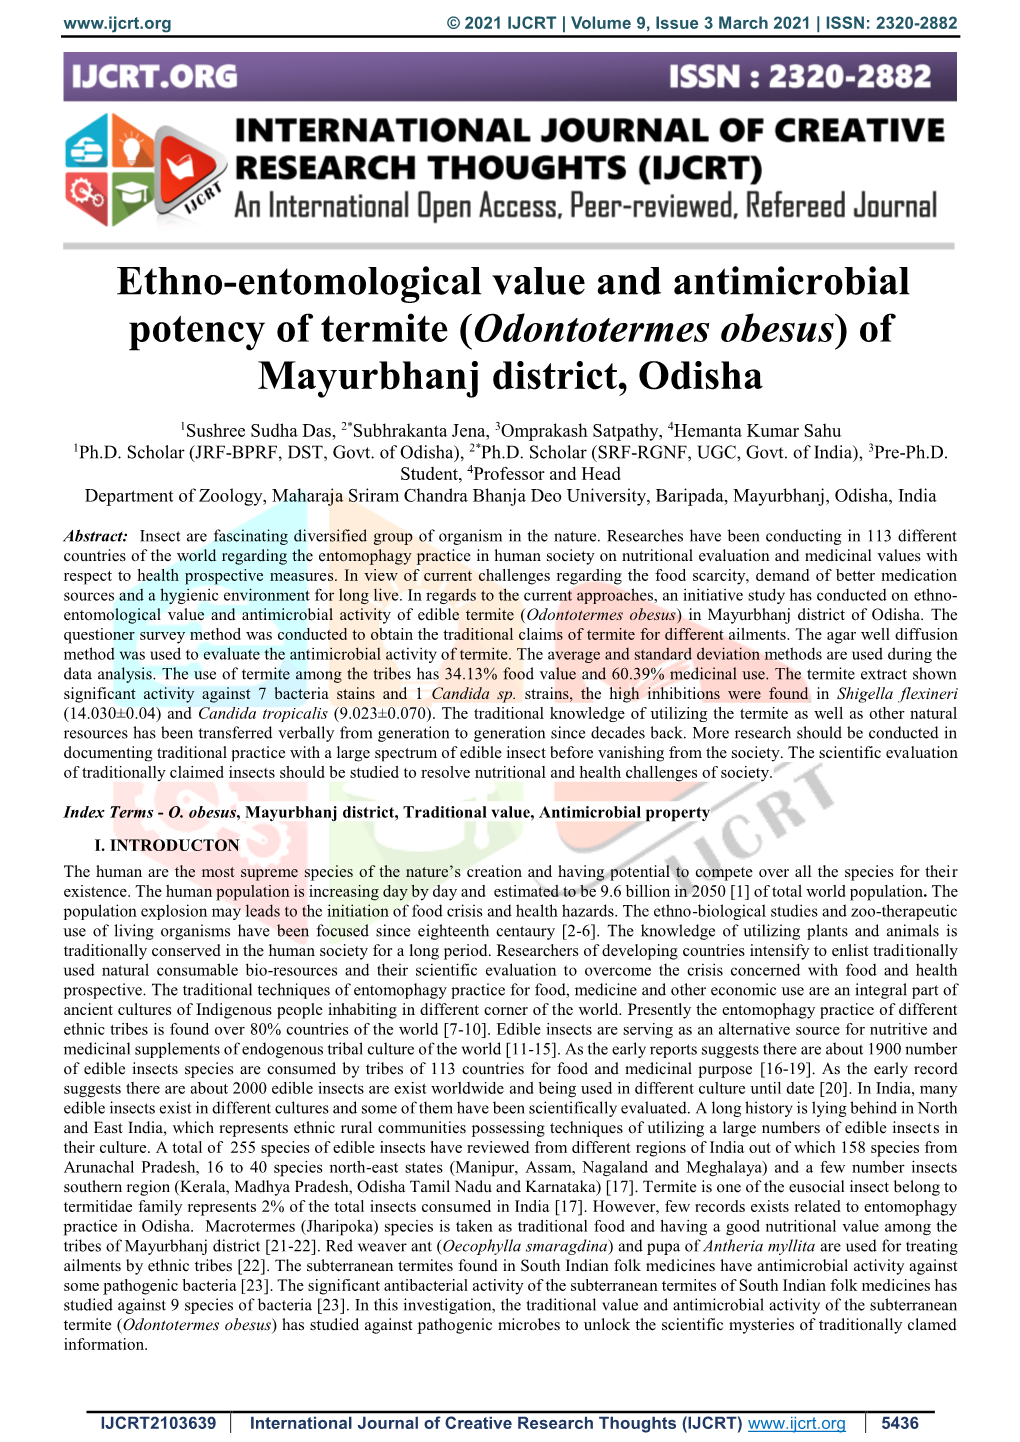 Ethno-Entomological Value and Antimicrobial Potency of Termite (Odontotermes Obesus) of Mayurbhanj District, Odisha